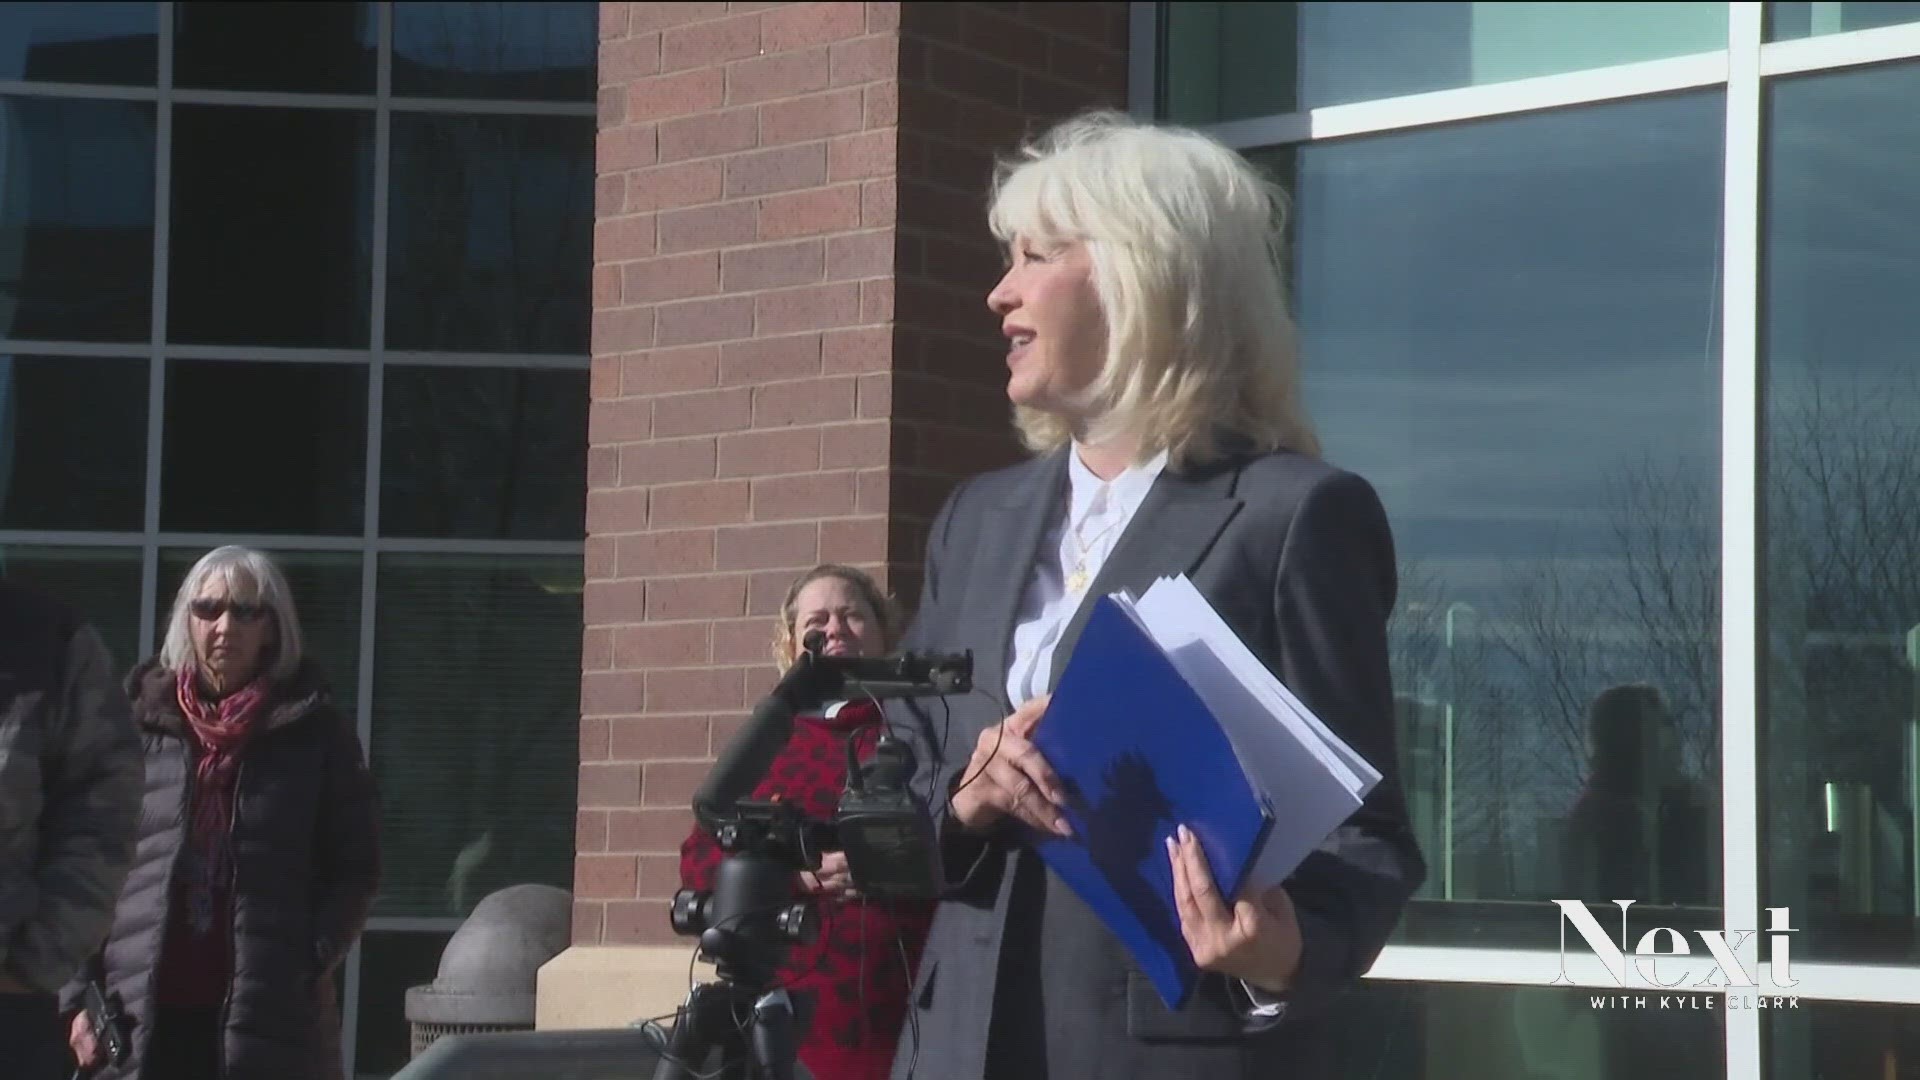 The former Mesa County clerk faces felony charges that include tampering with voting systems. She claims the criminal investigations are harassment.